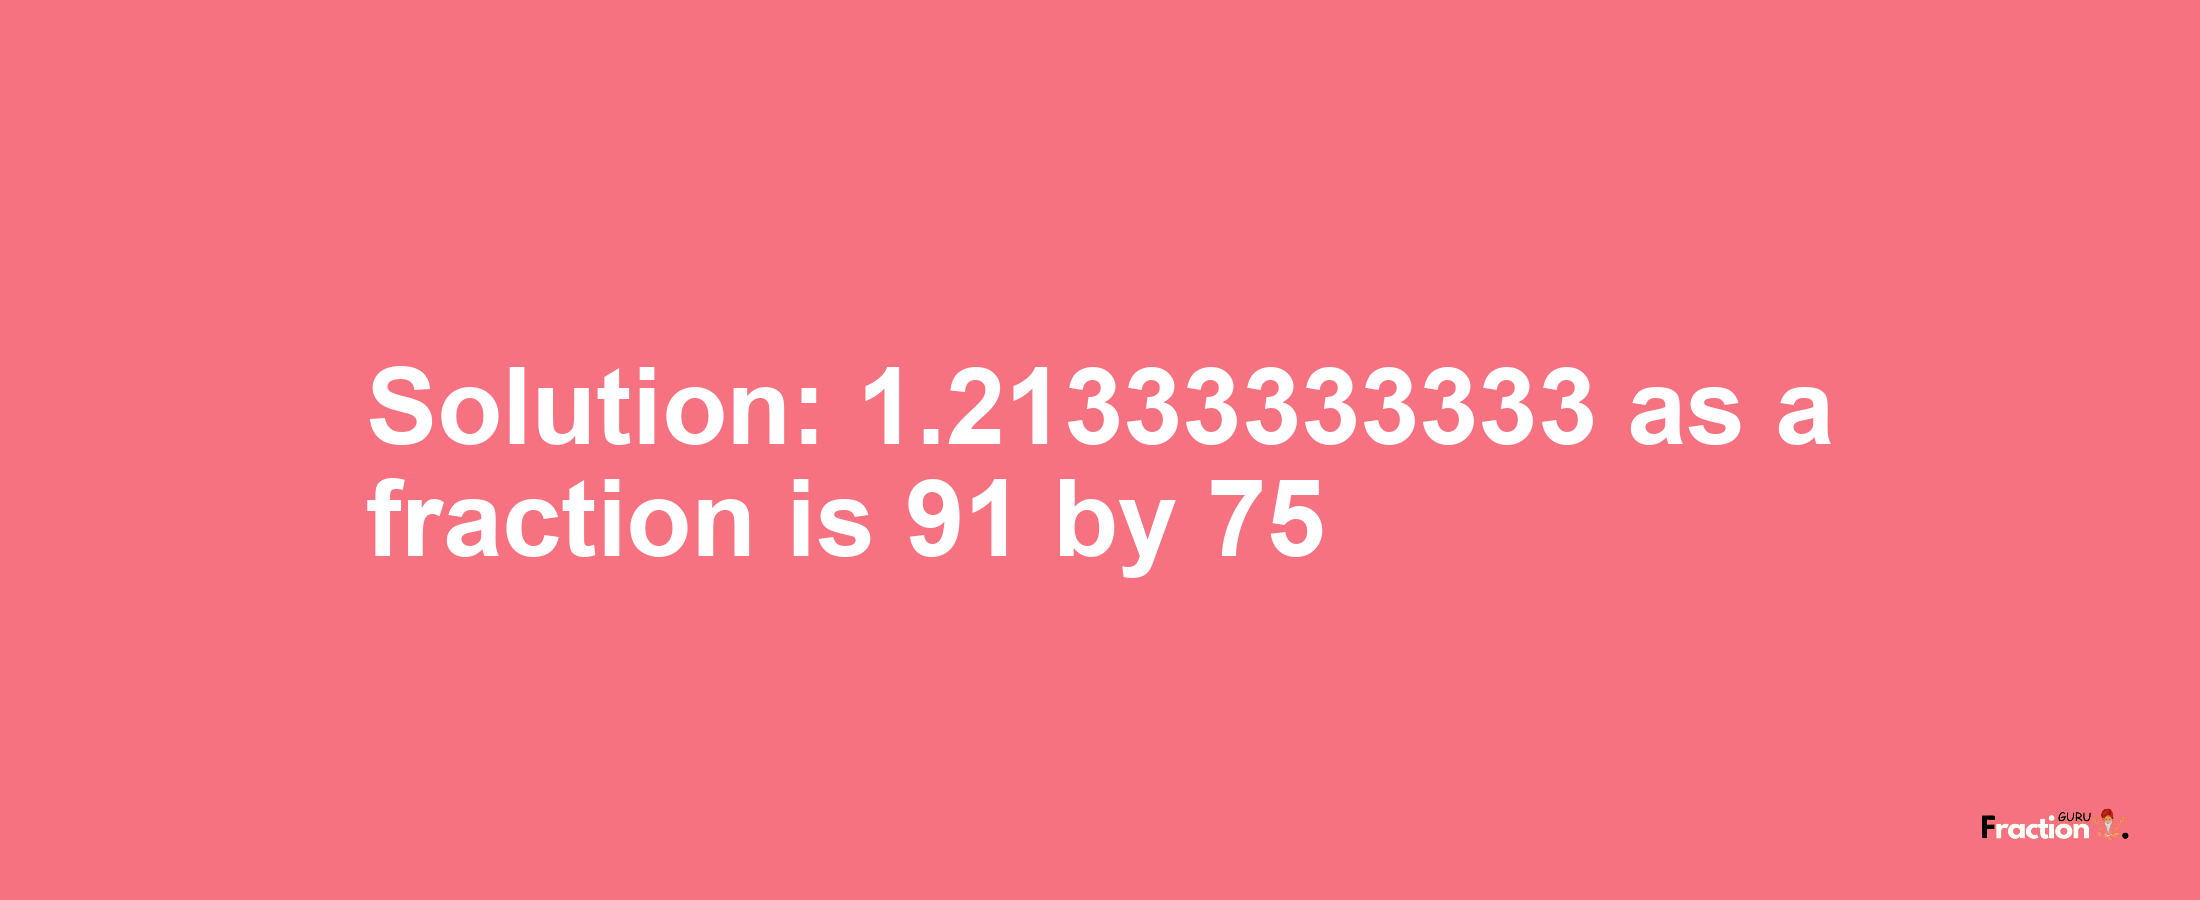 Solution:1.21333333333 as a fraction is 91/75